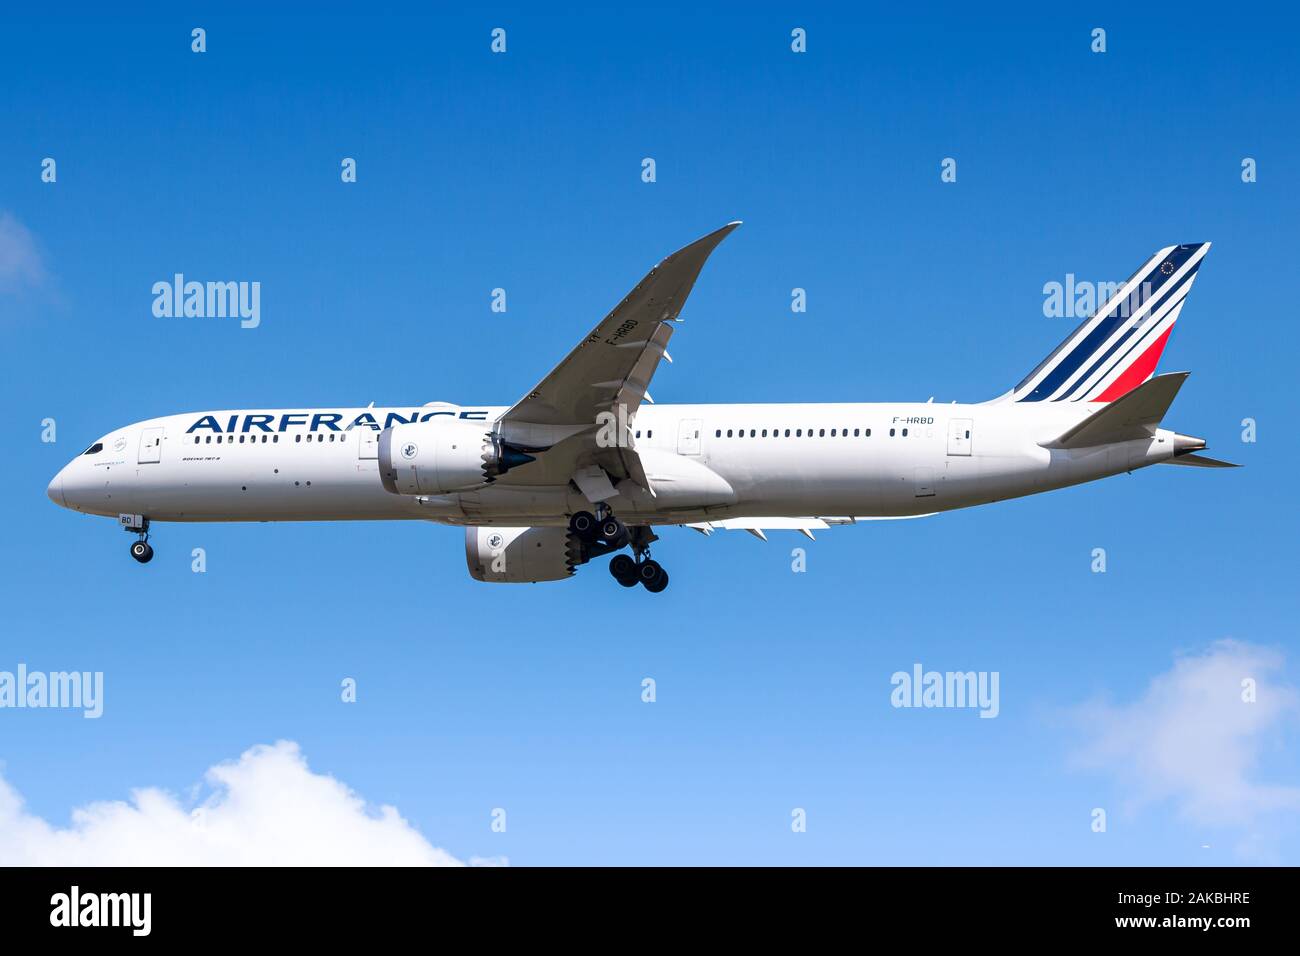 Paris, France - August 17, 2018: Air France Boeing 787 Dreamliner airplane at Paris Charles de Gaulle airport (CDG) in France. Boeing is an aircraft m Stock Photo